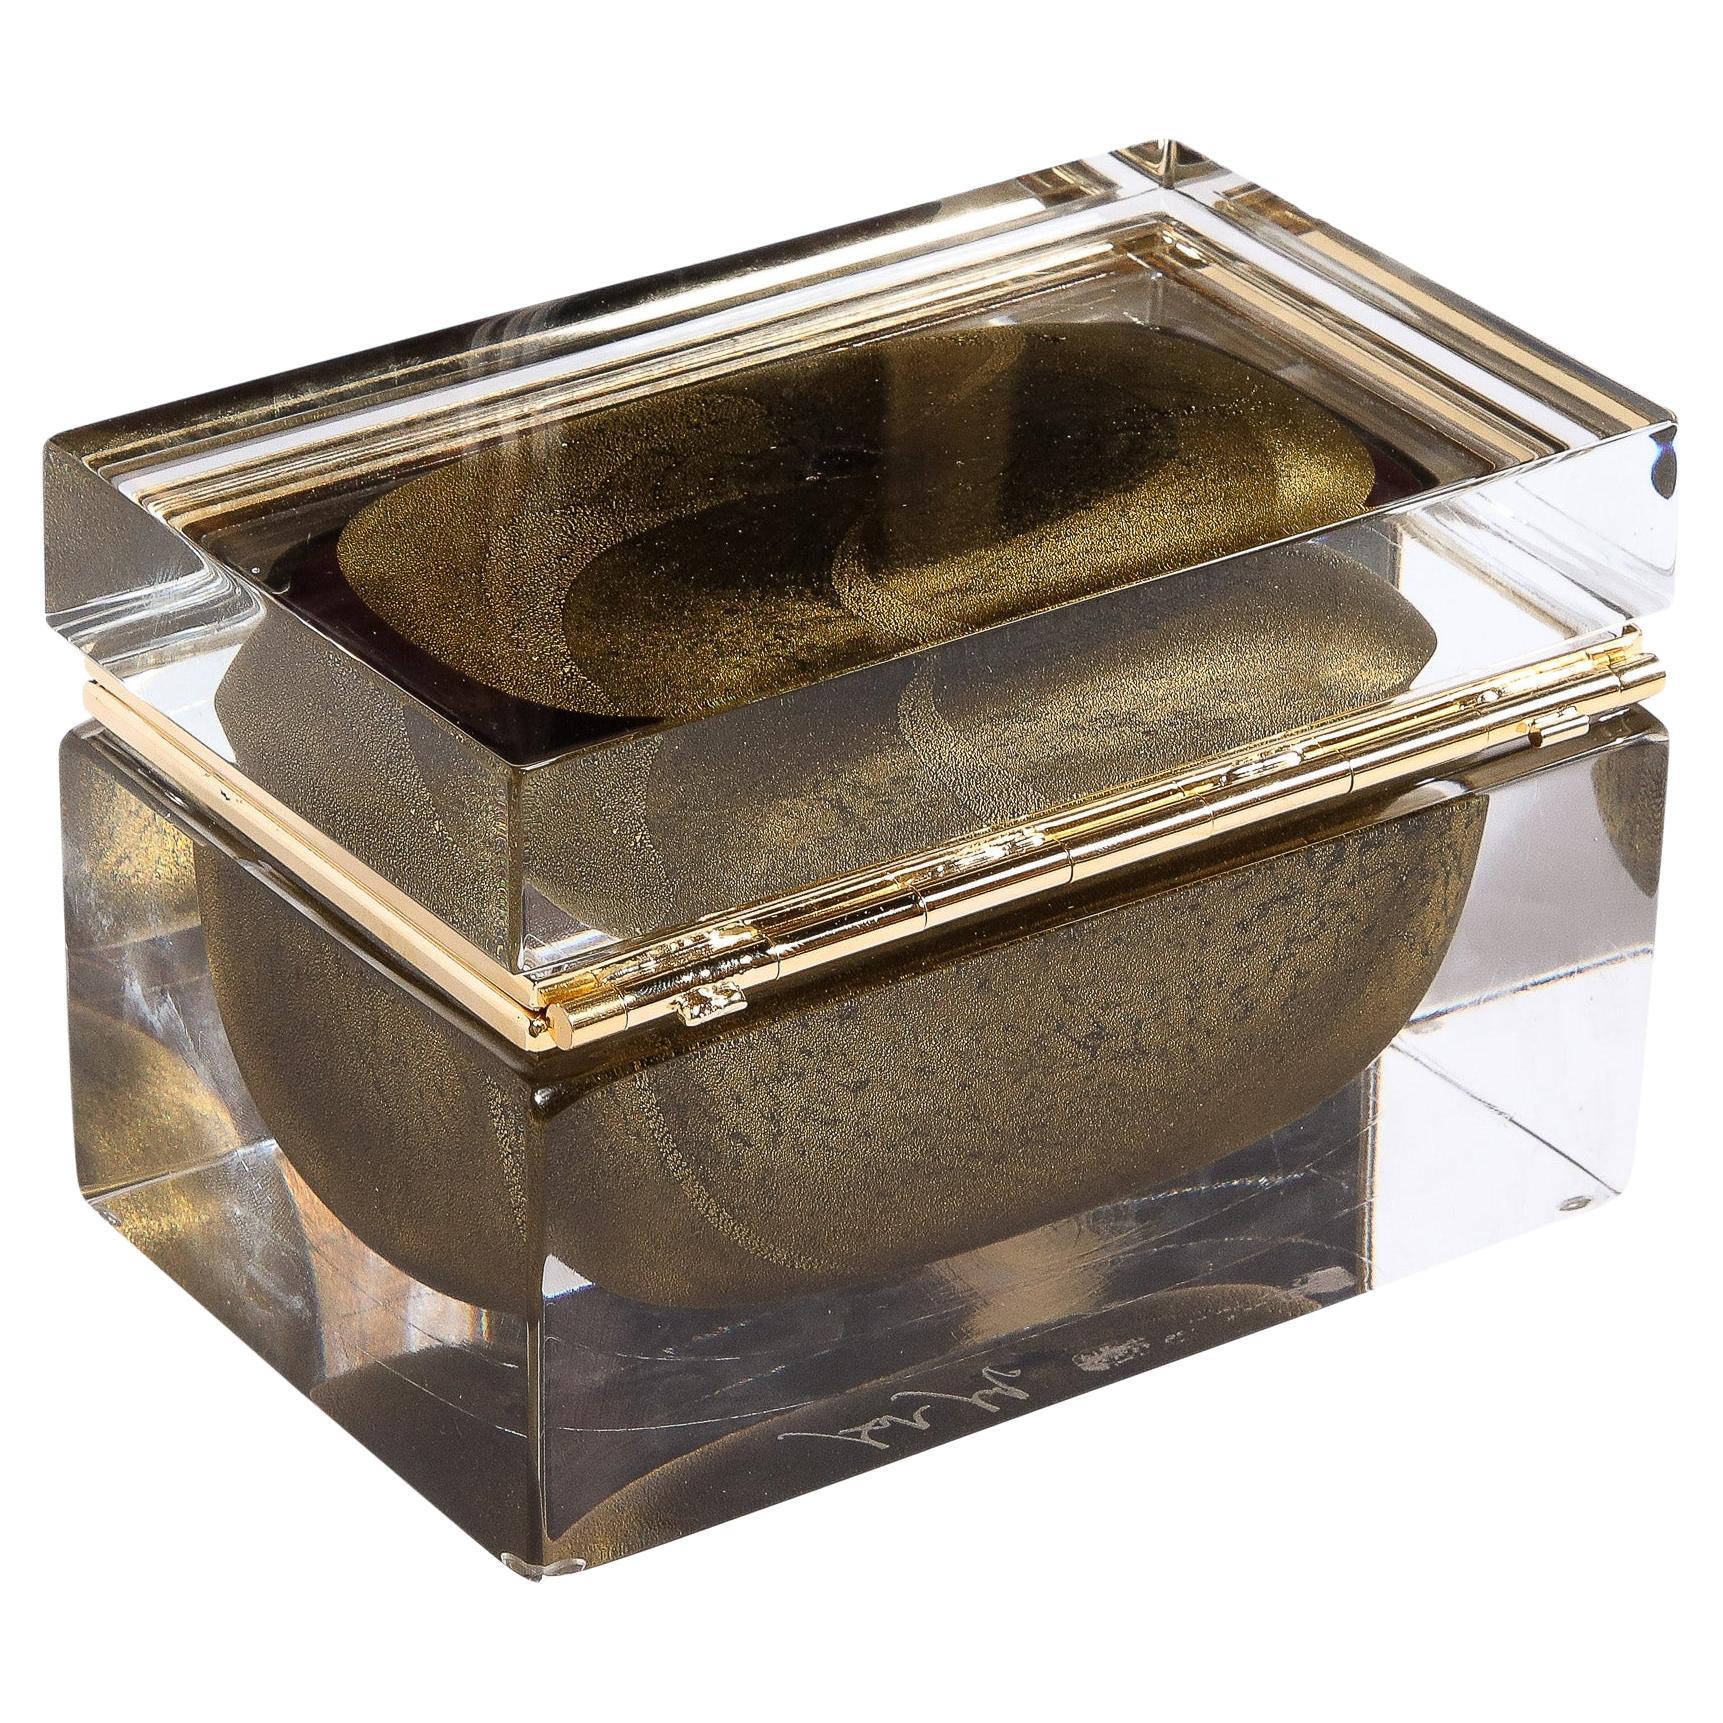 This elegant and impressive modernist decorative box was realized in Murano, Italy- the island off the coast of Venice renowned for centuries for its superlative glass production. It features a volumetric rectangular body with a translucent Murano